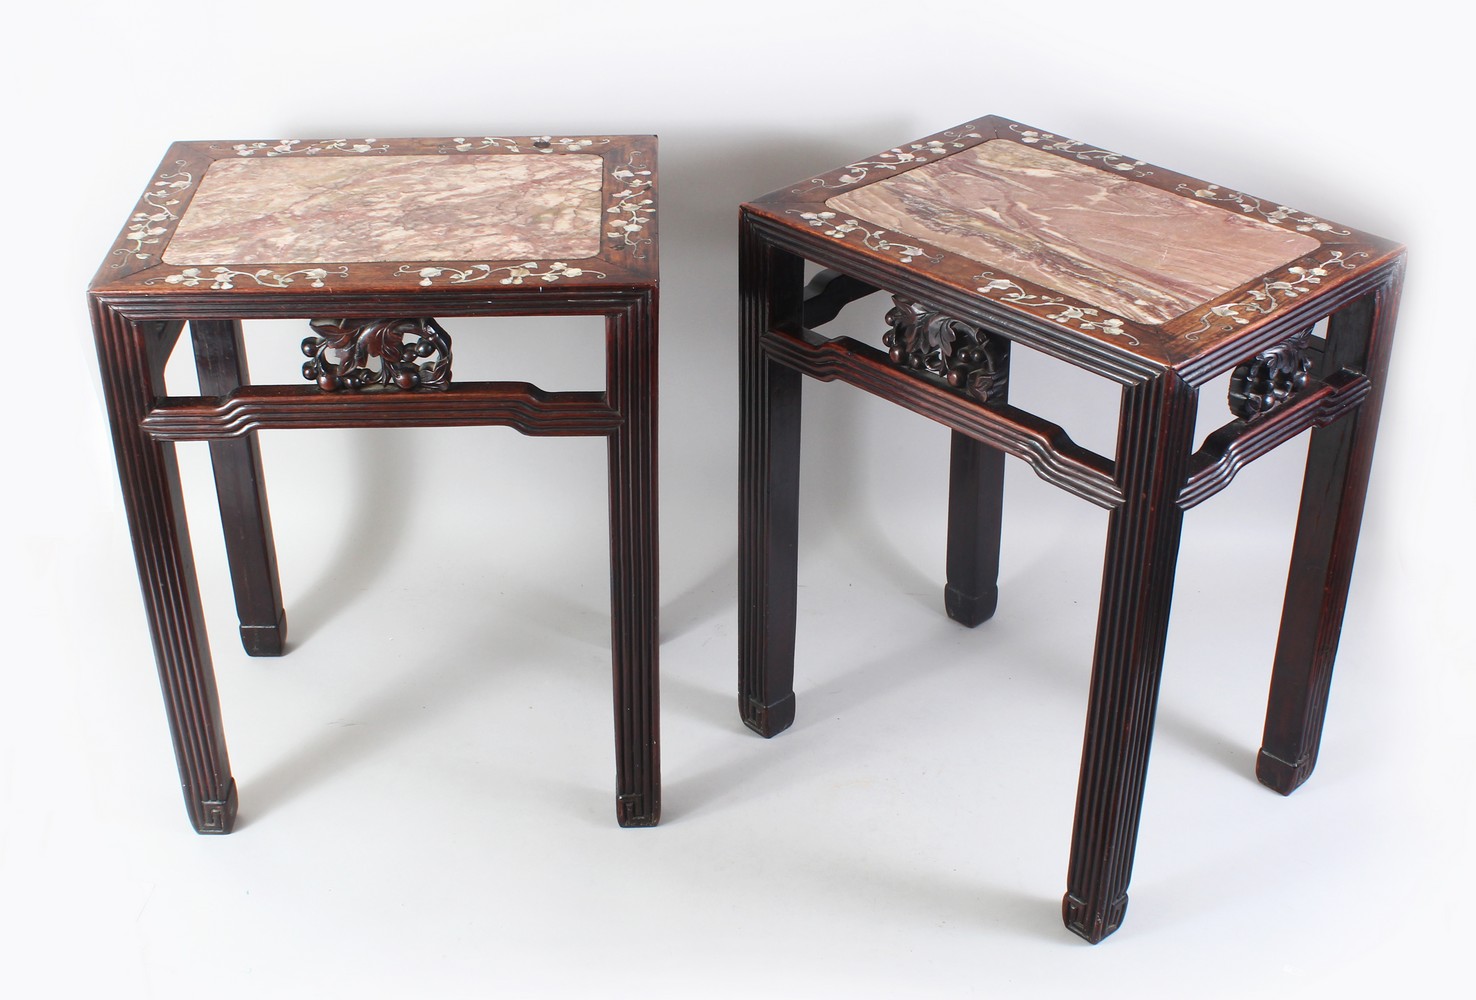 A GOOD PAIR OF 19TH CENTURY CHINESE HARDWOOD AND MOTHER OF PEARL MARBLE TOP STANDS, the tops inset